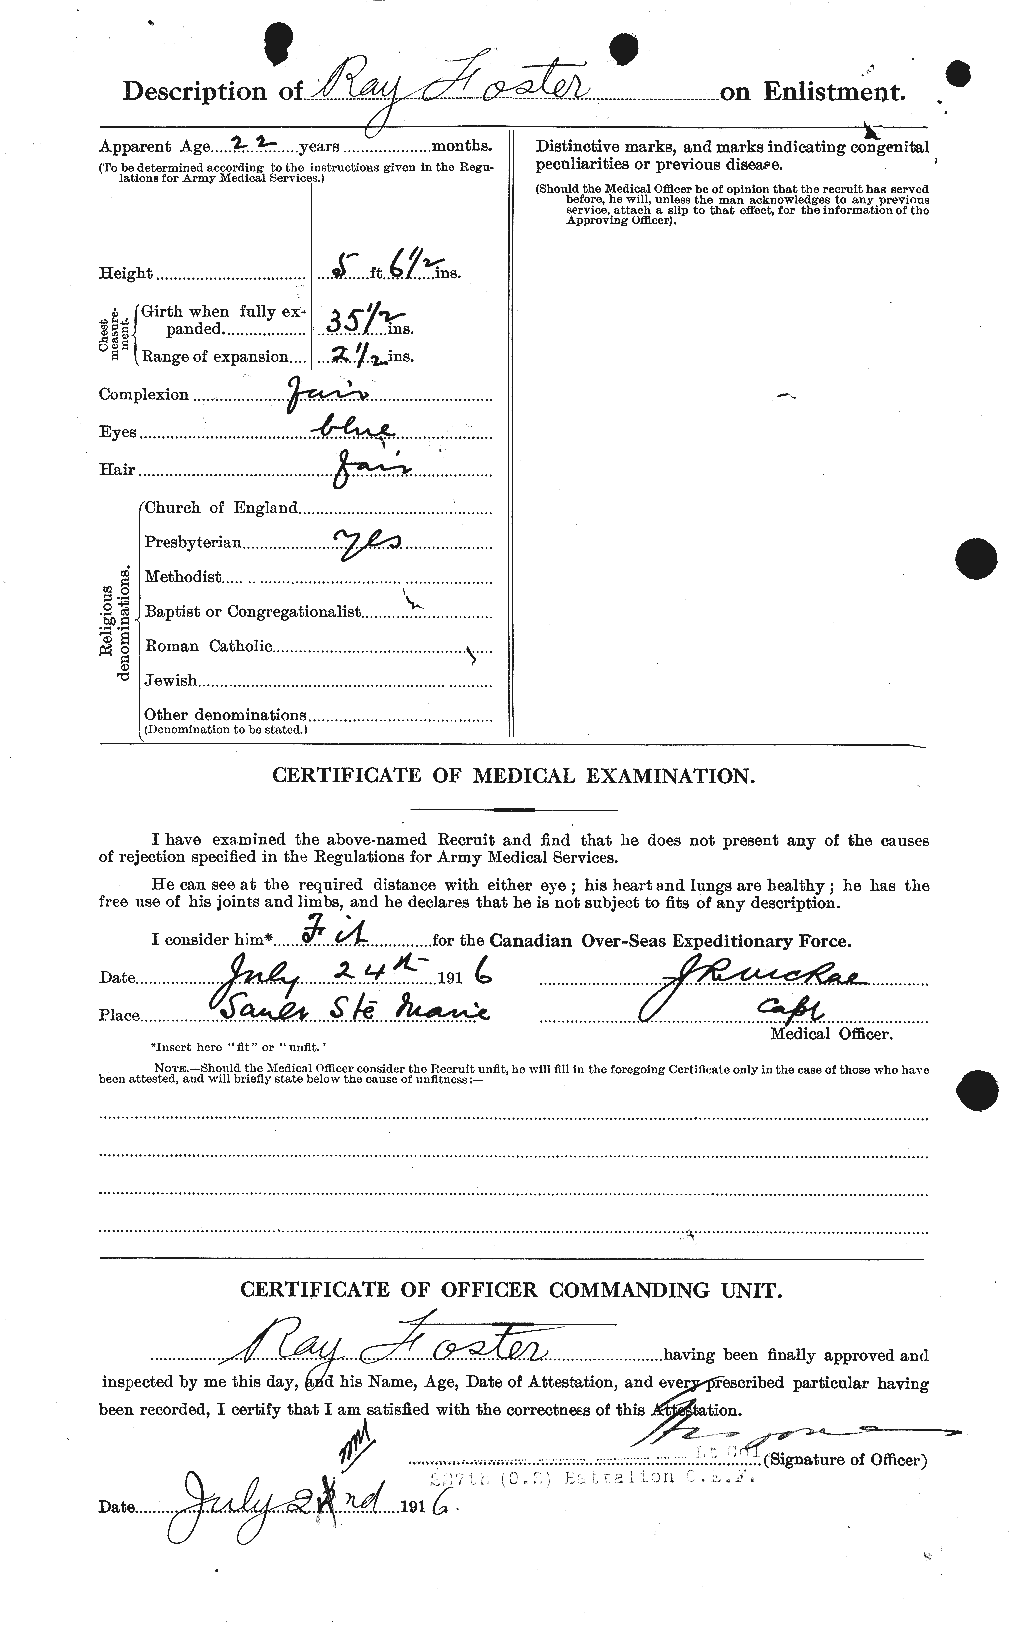 Personnel Records of the First World War - CEF 333449b